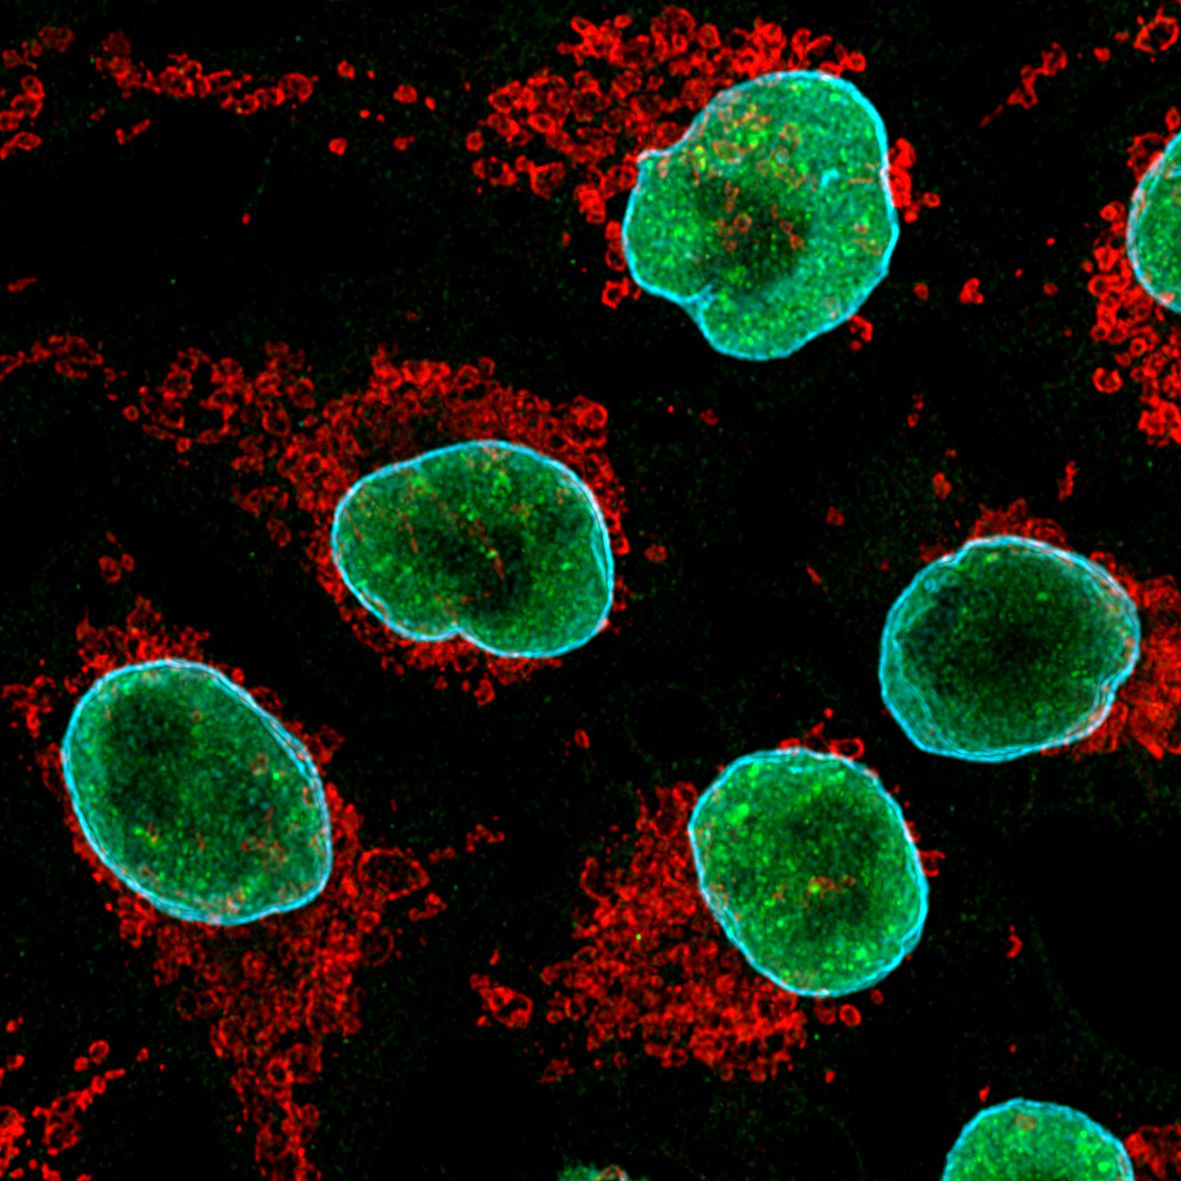 Immunofluorescence of HeLa: PFA-fixed HeLa cells were stained with anti-TDP-43 (10782-2-AP) labeled with FlexAble CoraLite® Plus 488 Kit (KFA001, green), anti-Tom20 (11802-1-AP) labeled with FlexAble CoraLite® Plus 555 Kit (KFA002, red) and anti-Lamin B1 (12987-1-AP) labeled with FlexAble CoraLite® Plus 647 Kit (KFA003, cyan).​ Confocal images were acquired with a 100x oil objective and post-processed. Images were recorded at the Core Facility Bioimaging at the Biomedical Center, LMU Munich.